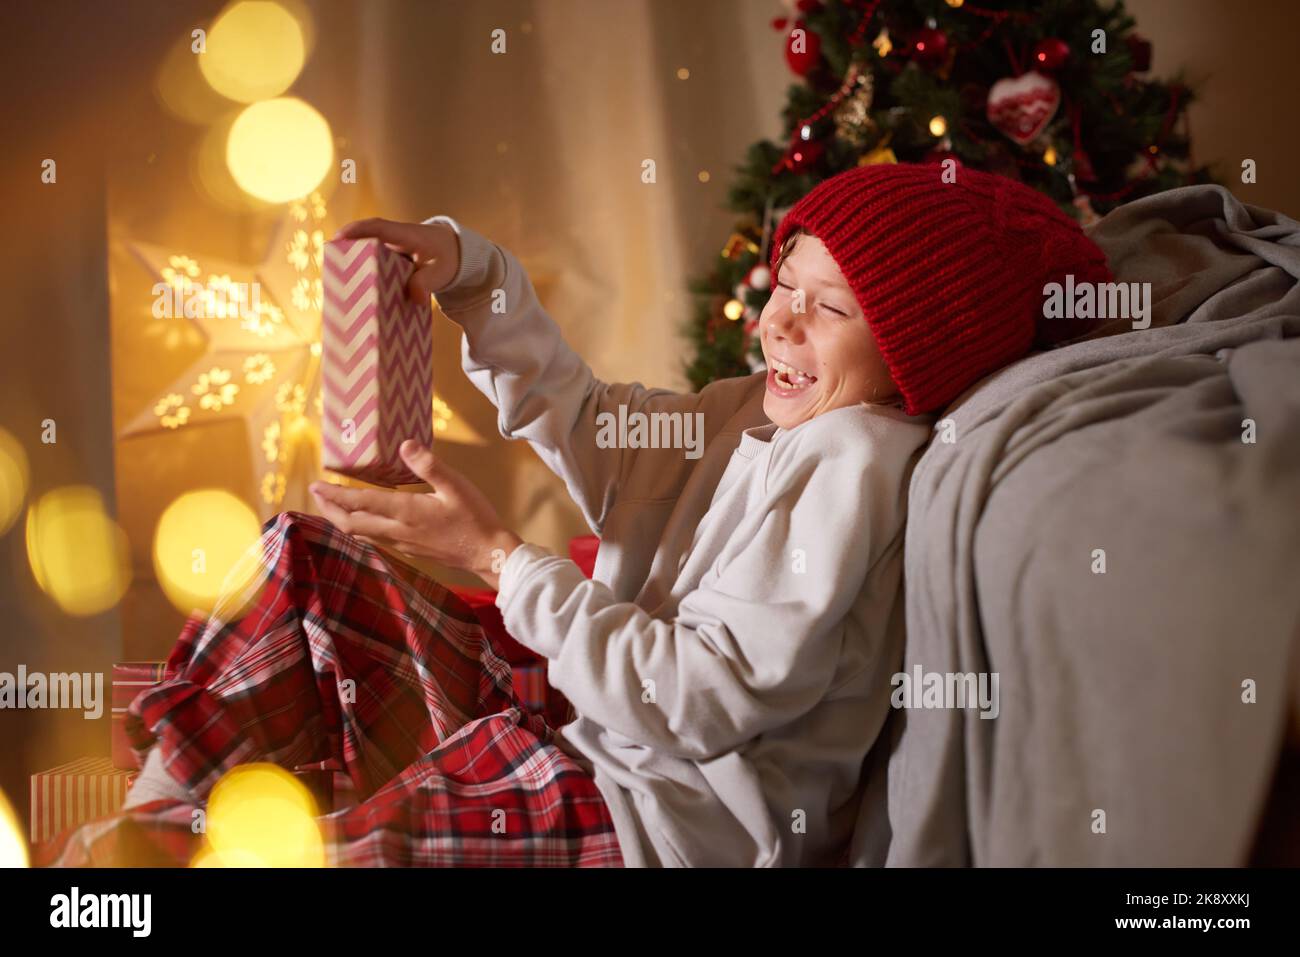 Kid opening gifts presents Happy reaction to Christmas New Year card adorable character Gifts giving Stock Photo